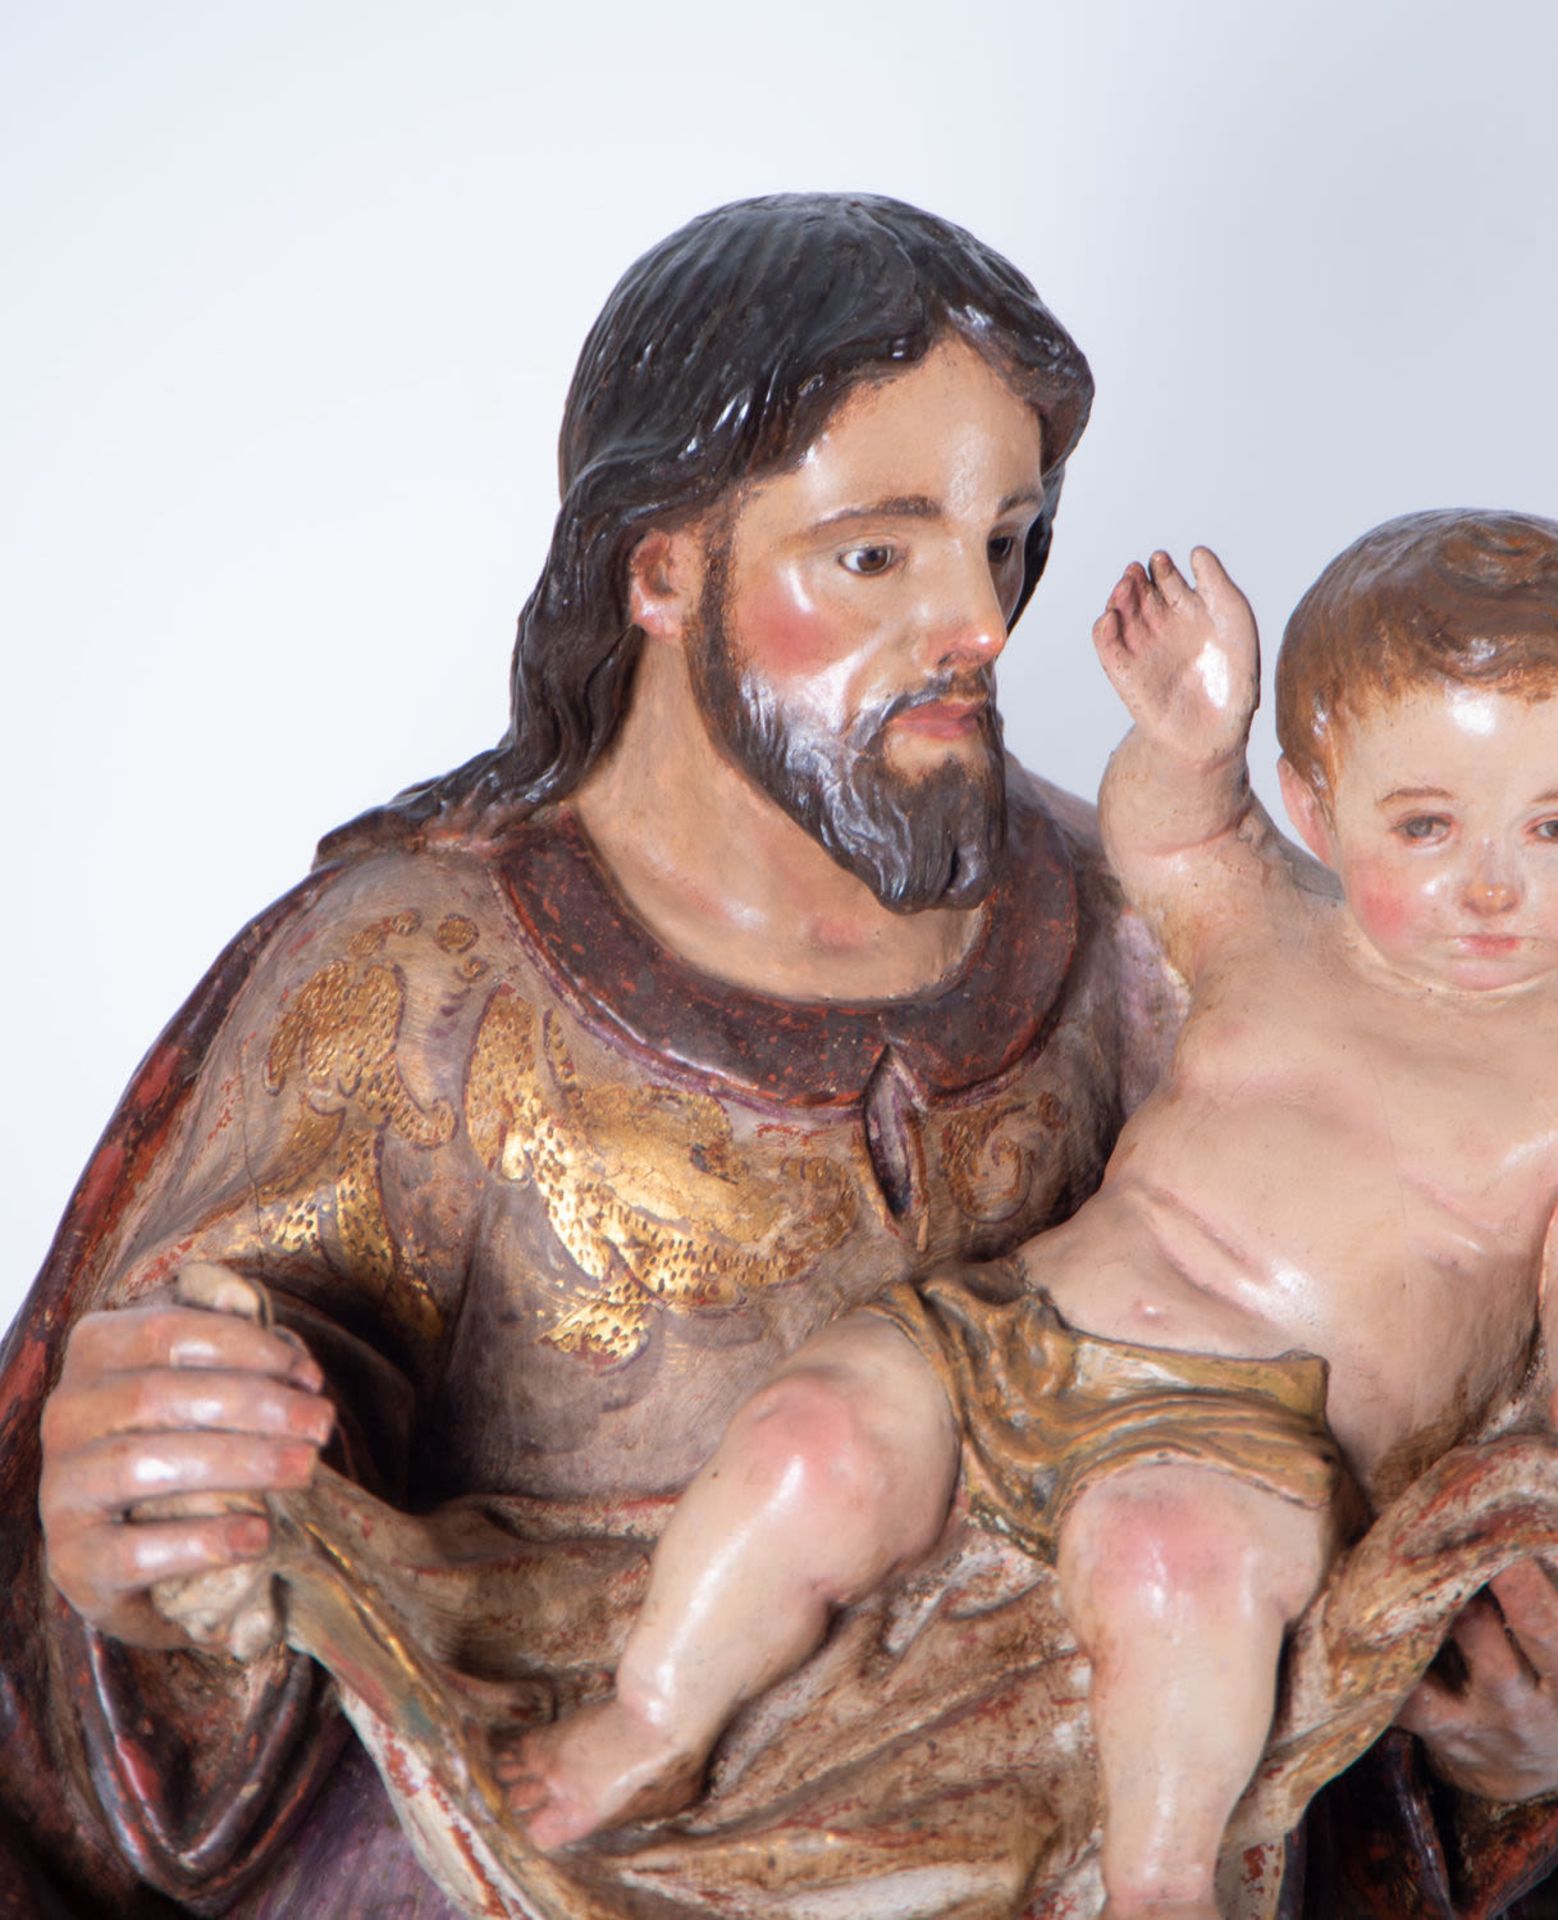 Saint Joseph with Child in Arms, Sevillian school of Pedro Roldán from the end of the 17th century - Image 5 of 6